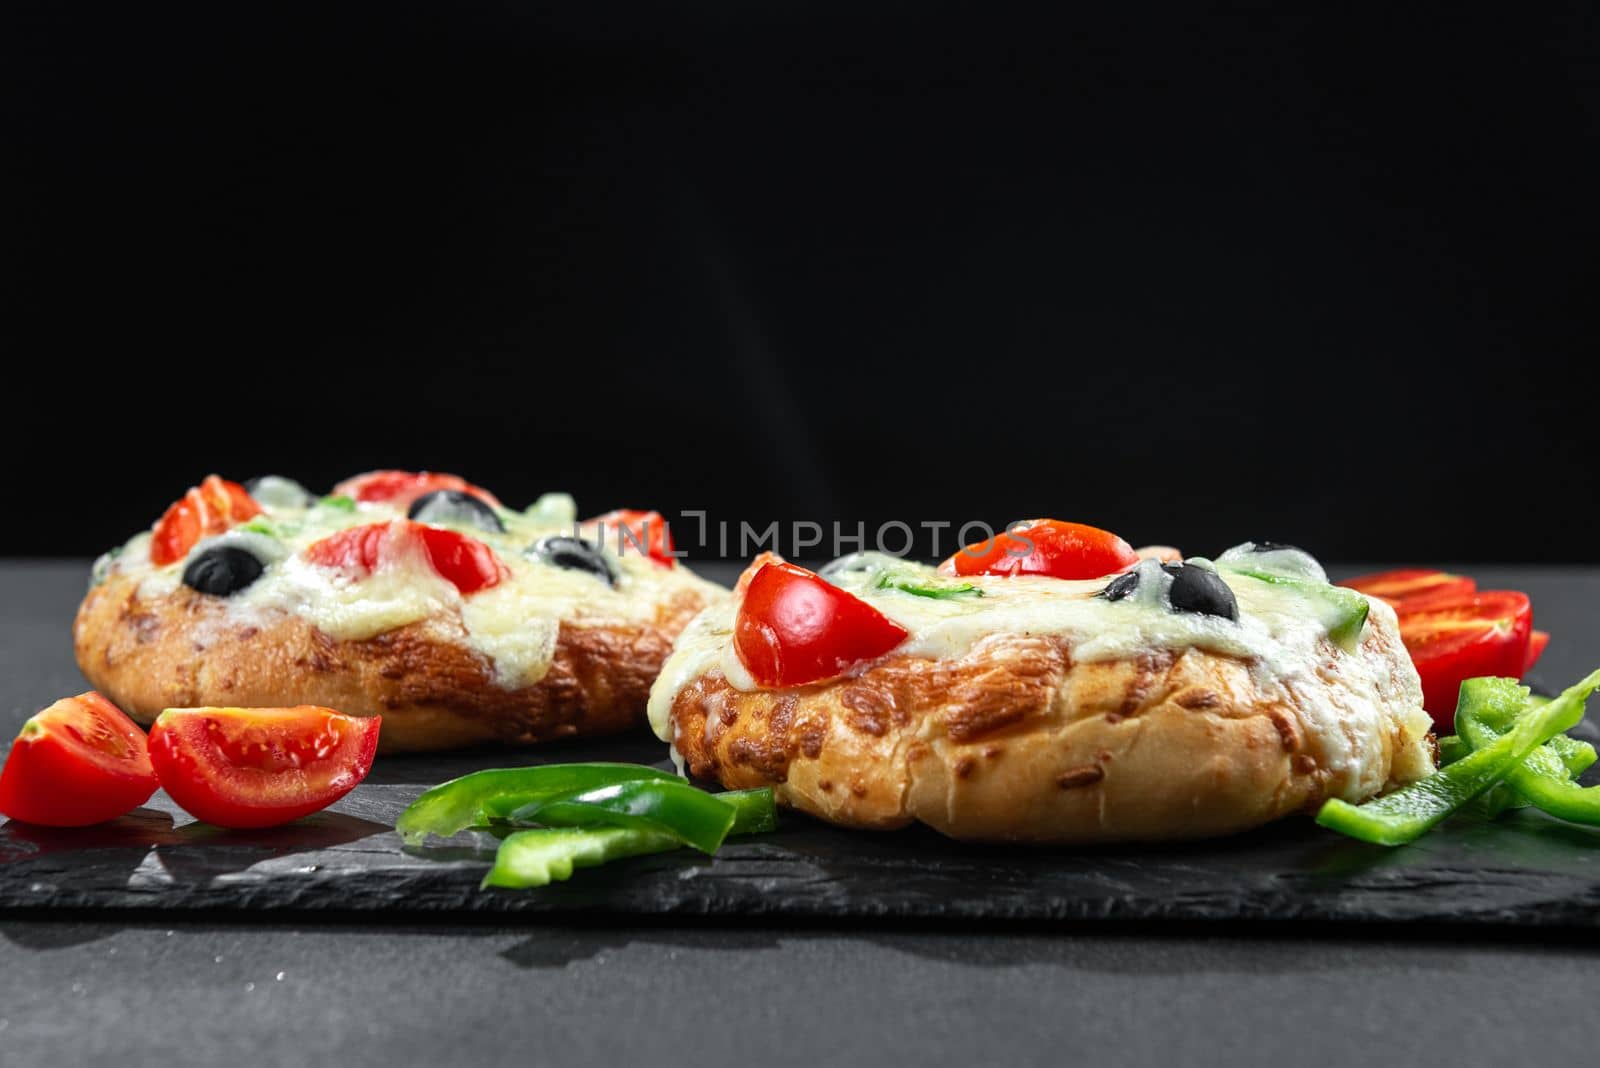 Homemade pizza with vegetables for breakfast on black background with blank space for text by gulyaevstudio